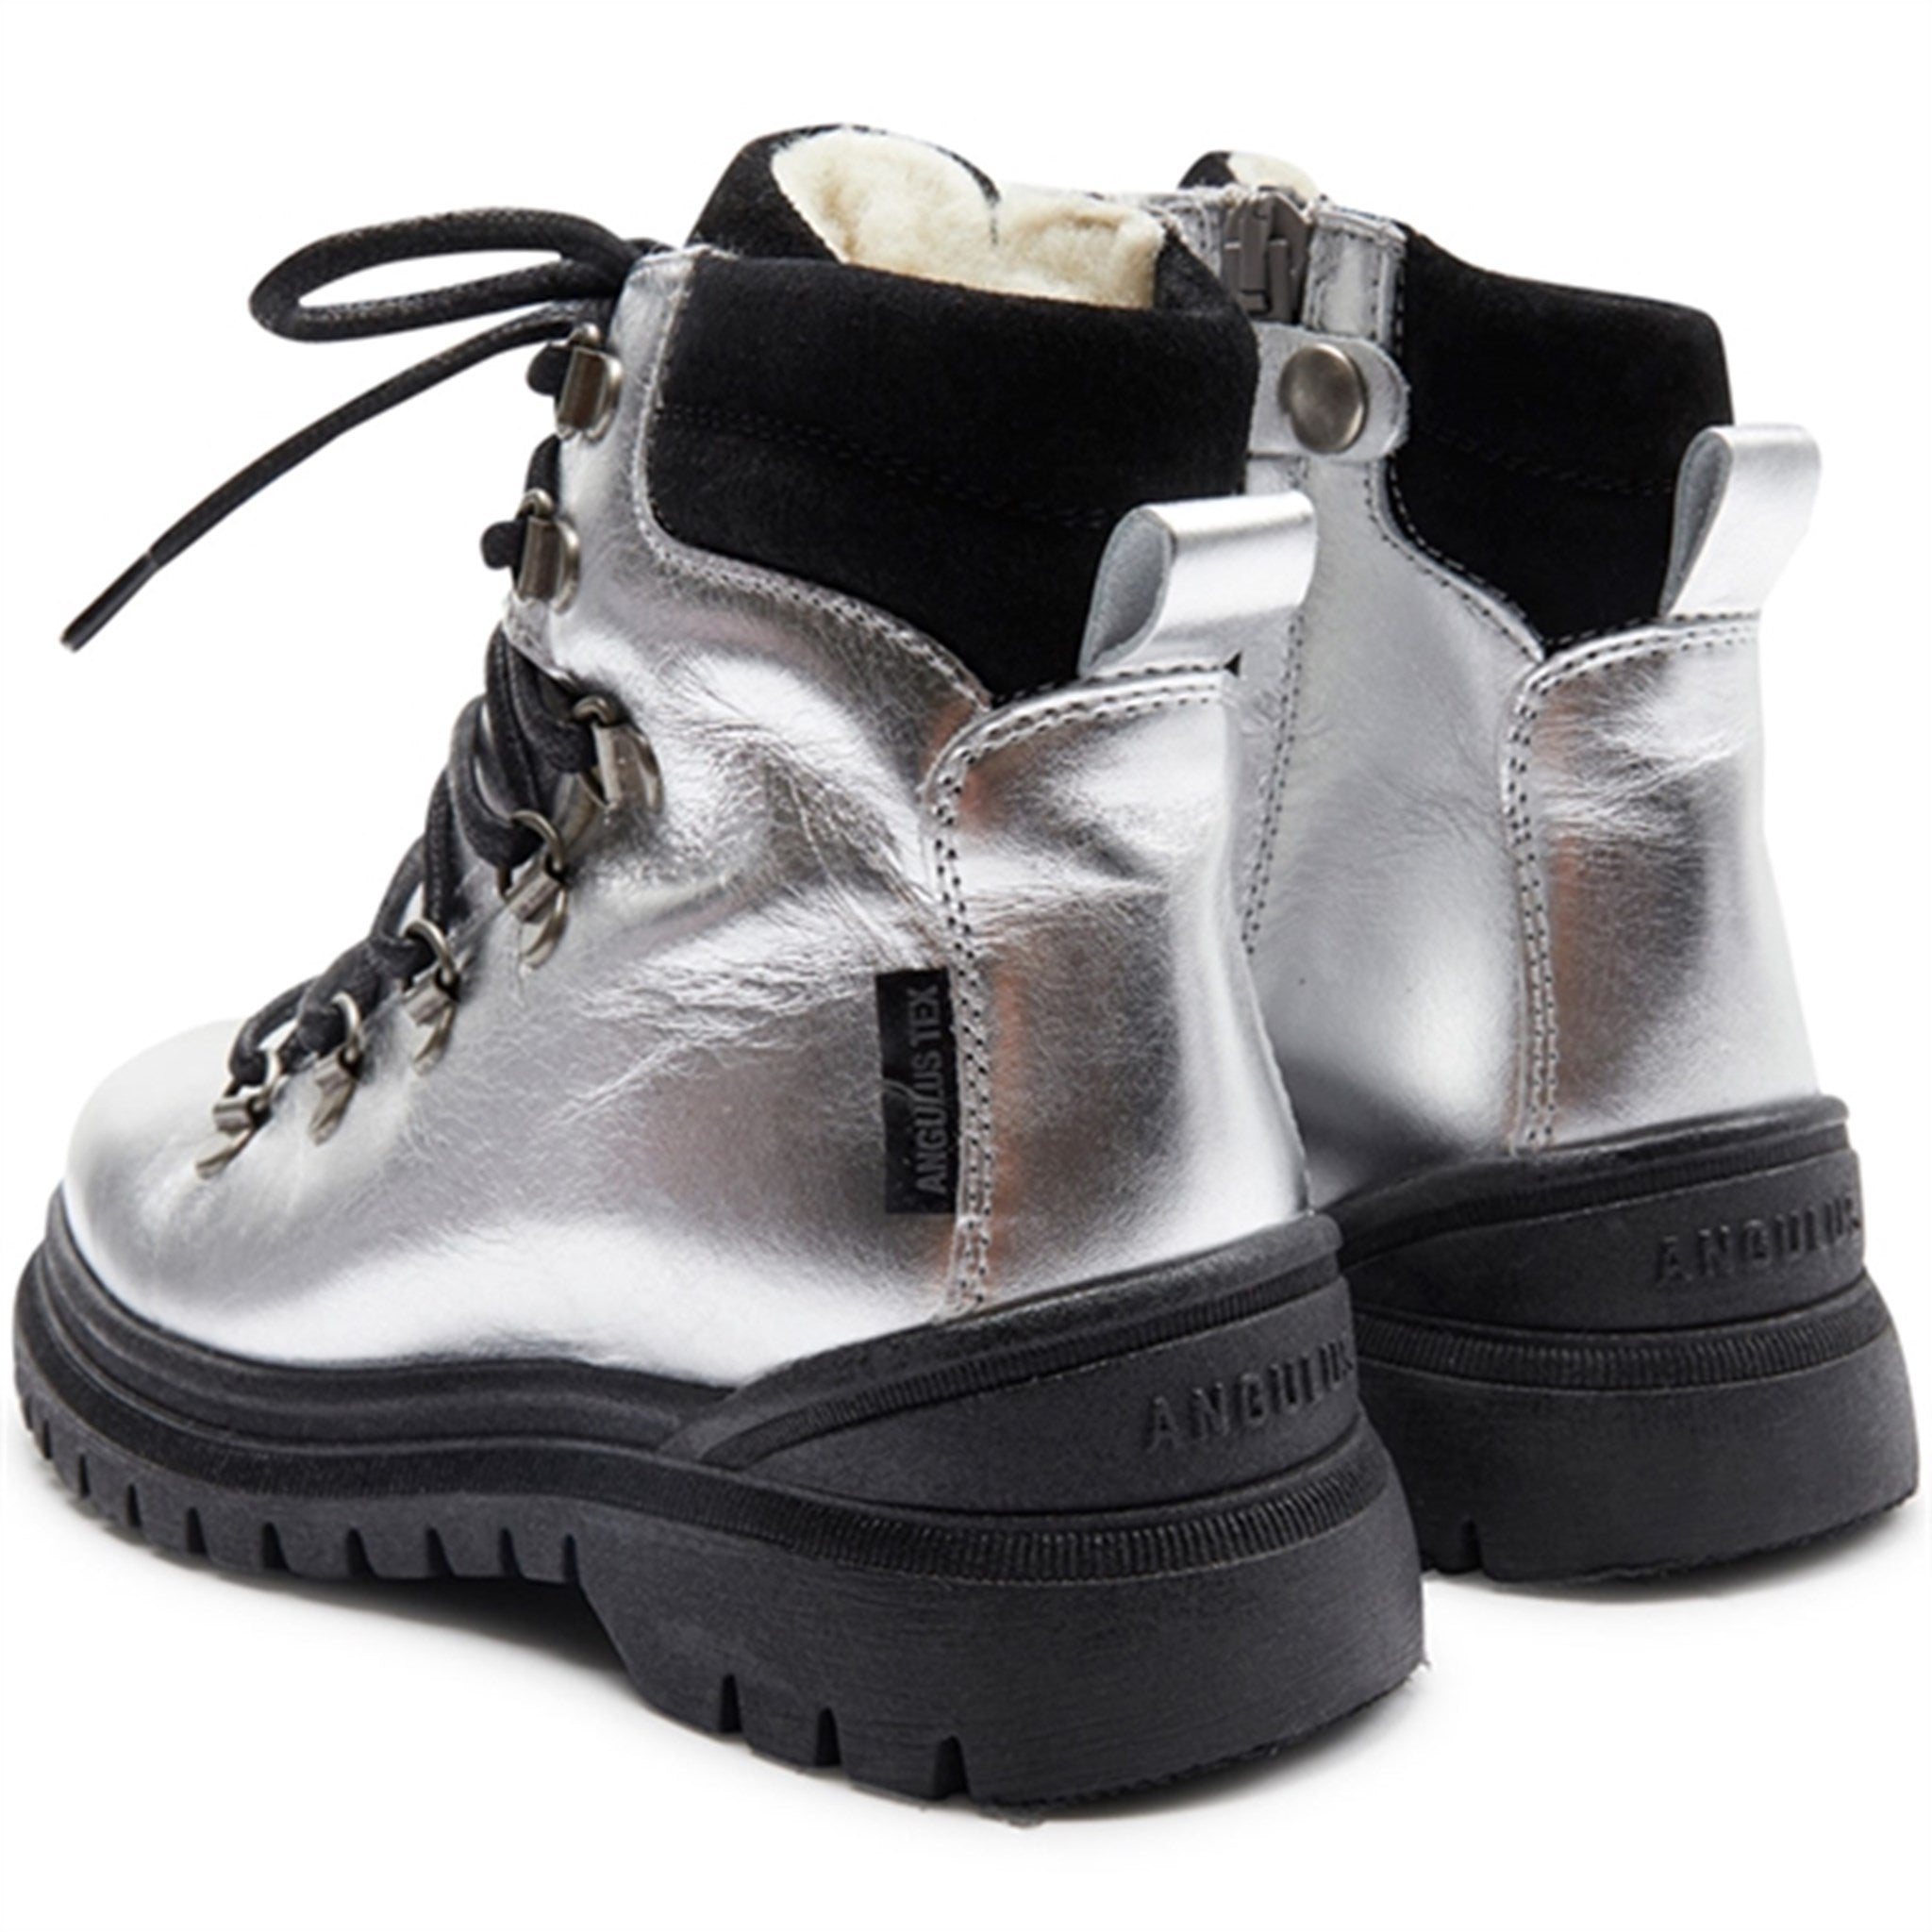 Angulus Tex Lace Boots With Zipper Silver/Black 7